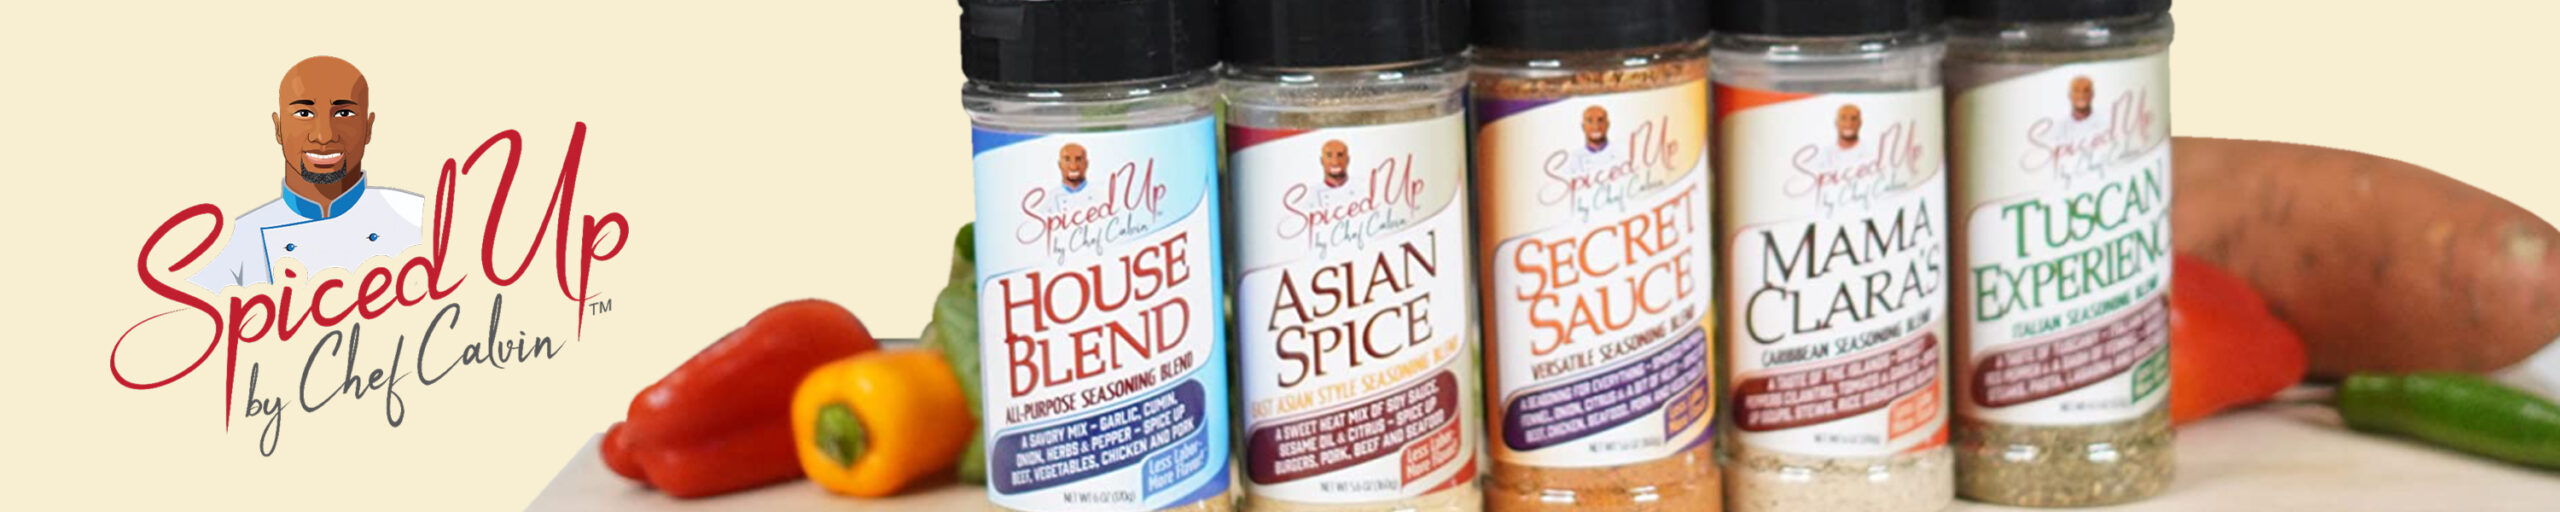 Spiced Up Seasonings by Chef Calvin black-owned